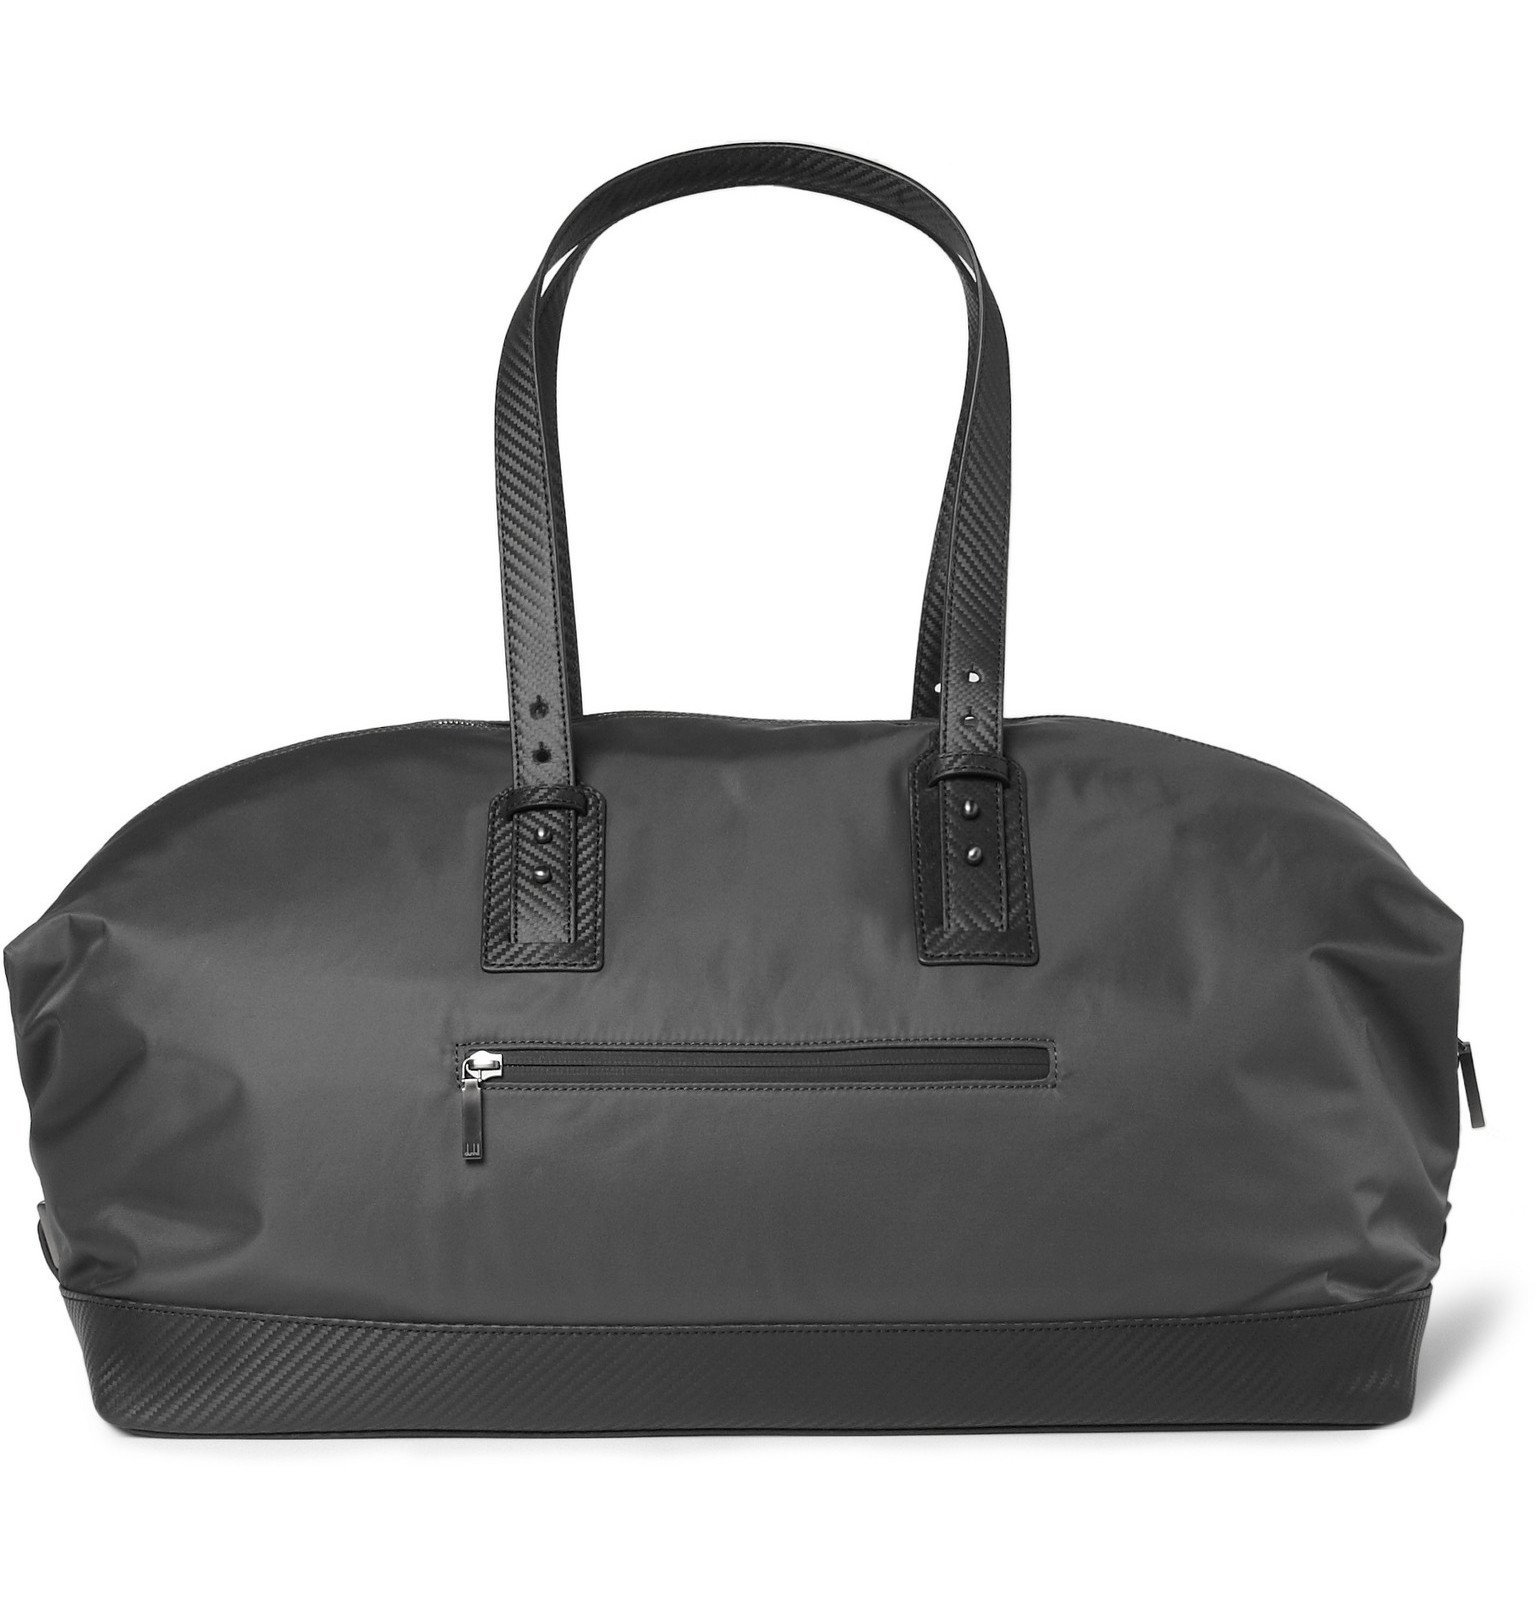 Dunhill - Lightweight Leather-Trimmed Holdall Bag - Gray Dunhill